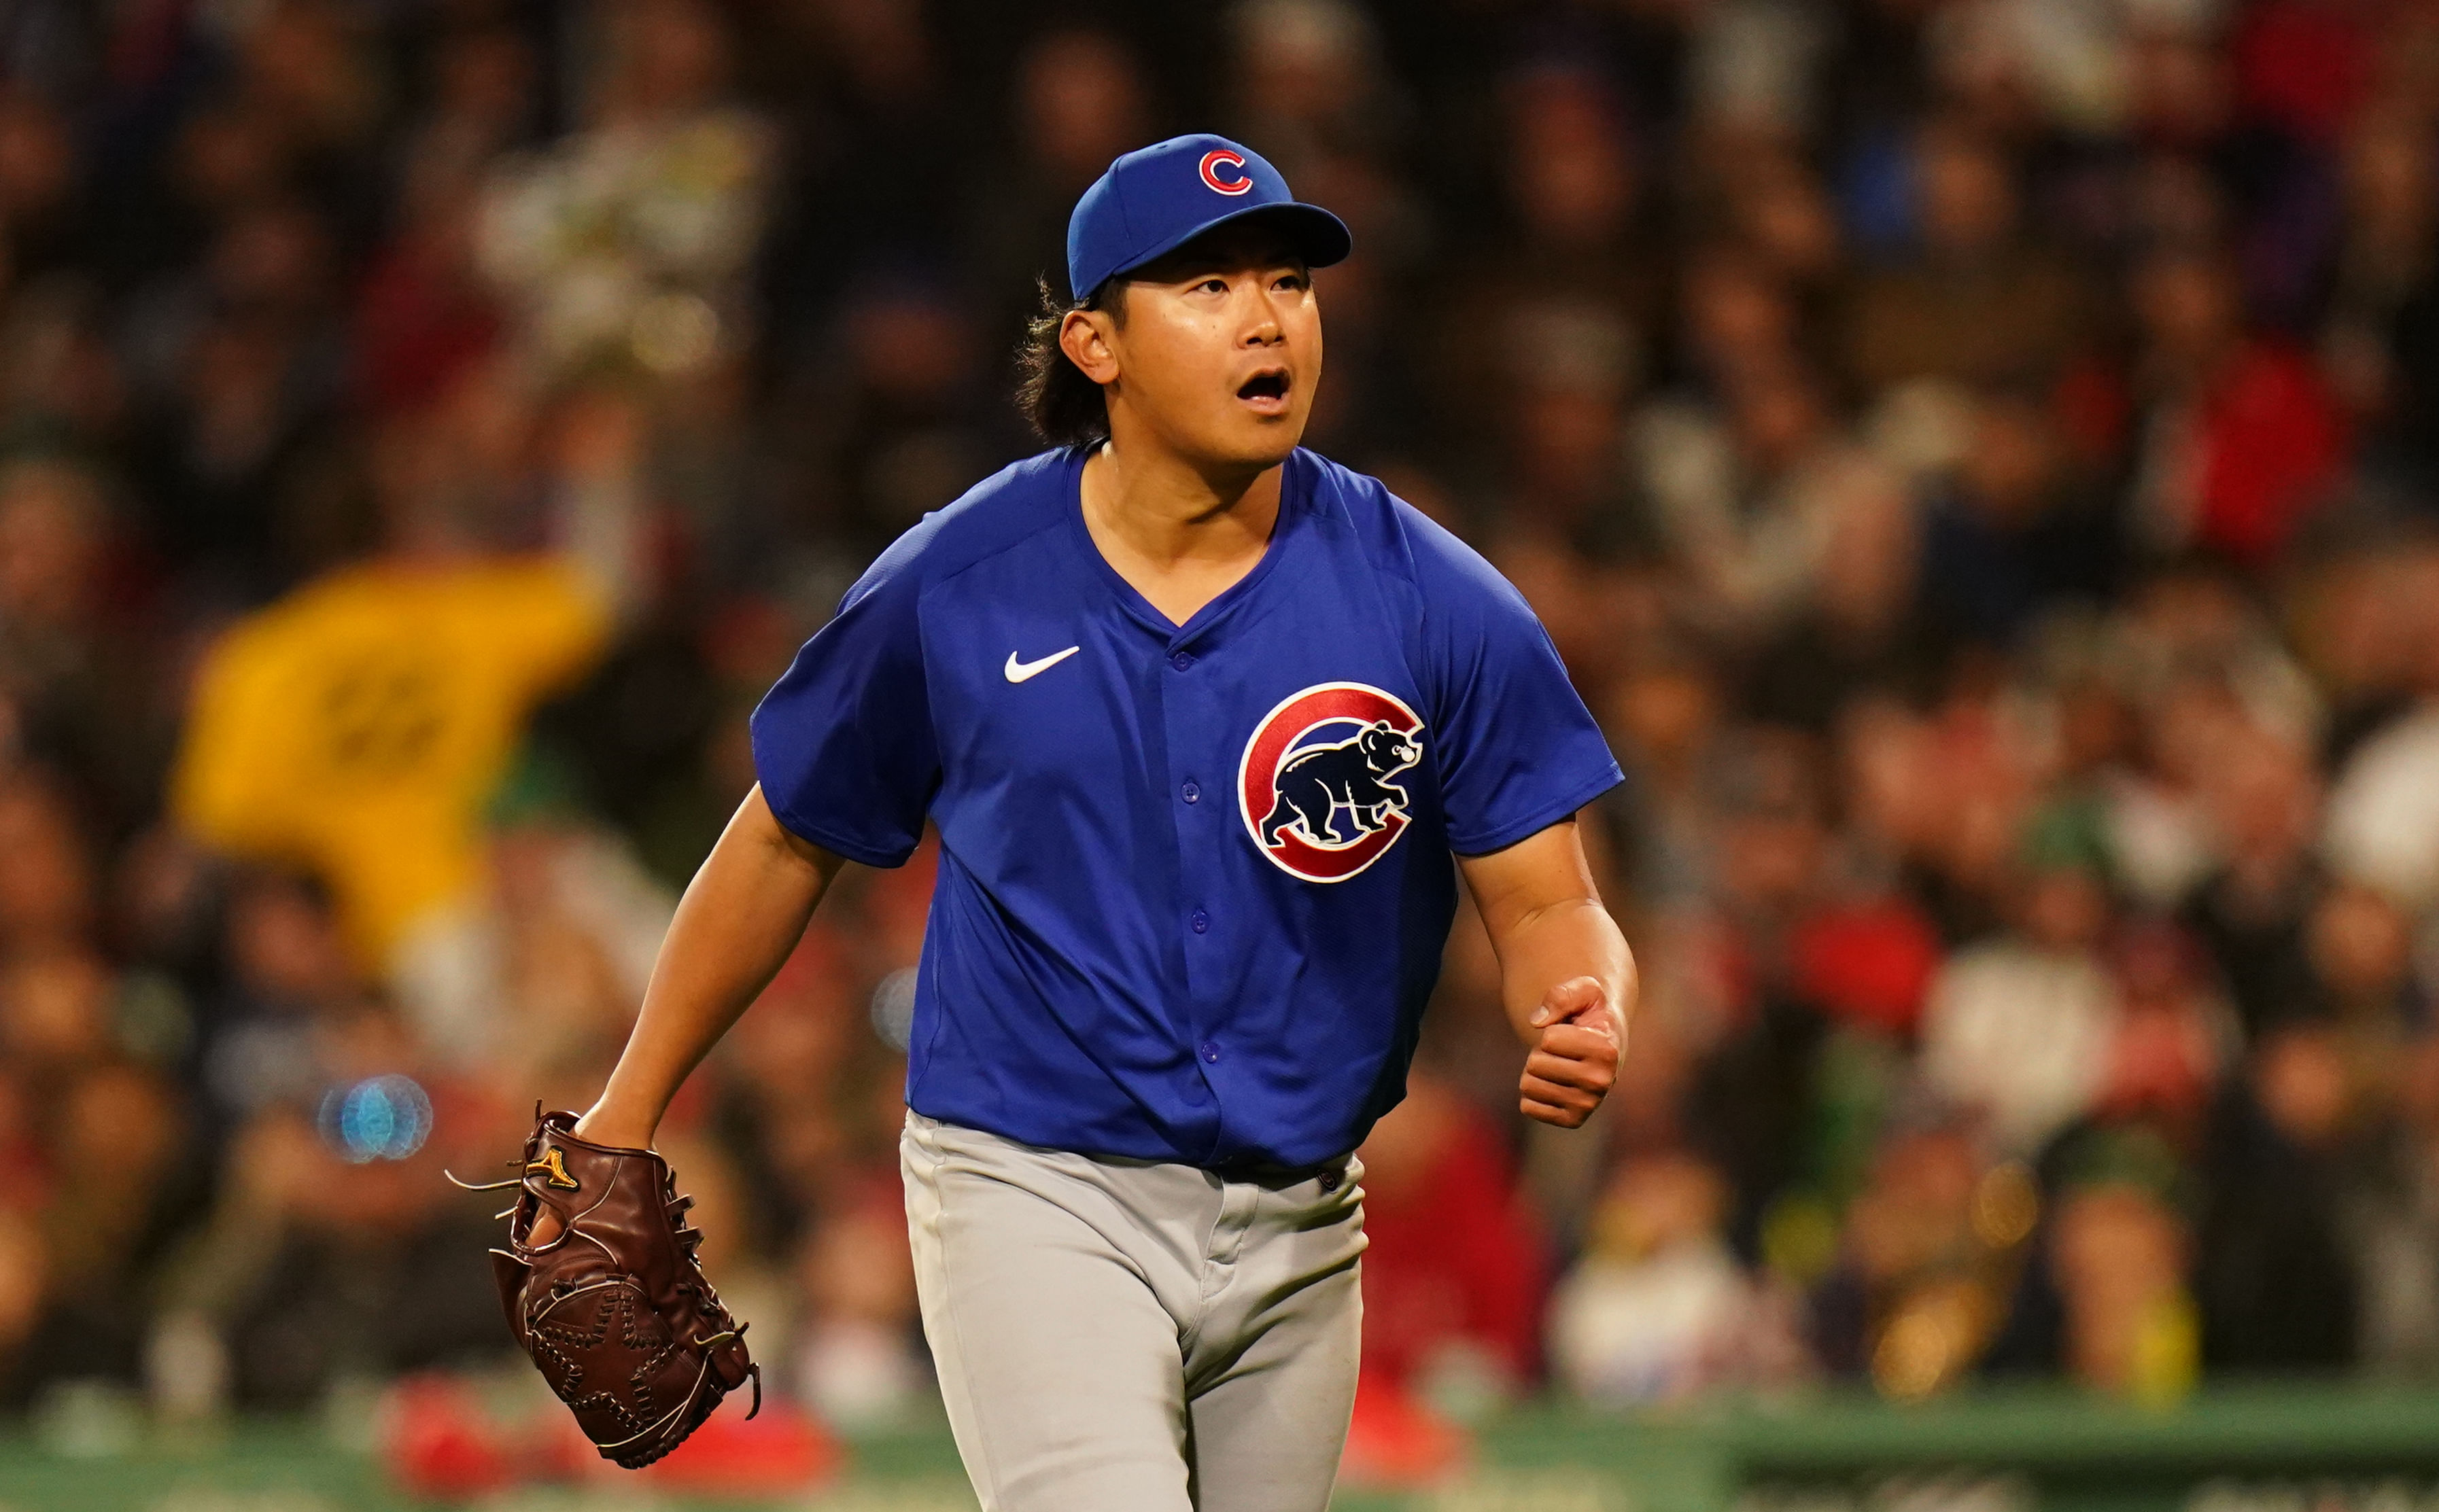 Shota Imanaga was crucial to the Cubs&rsquo; win on Friday night against the Red Sox by striking out seven batters and allowing only one run in 6 1/3 innings.